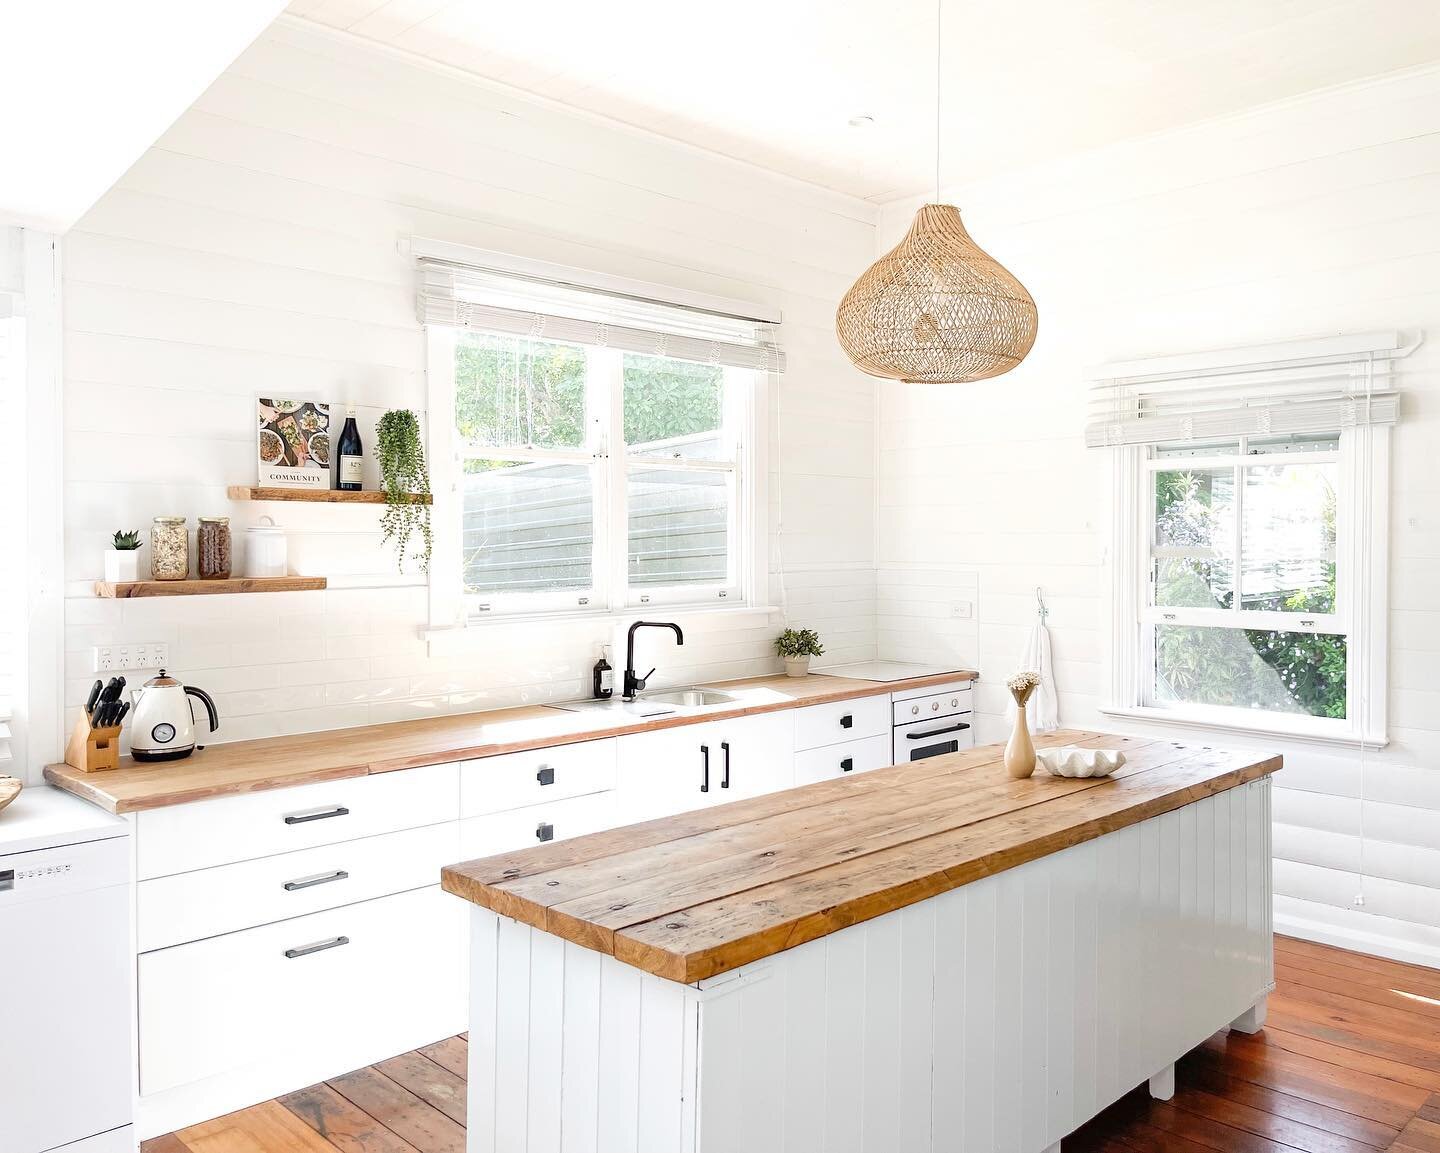 A light-filled kitchen in an old Bangalow home we styled a while ago that had some cosmetic renovations and touch ups, keeping the history and character 🤍